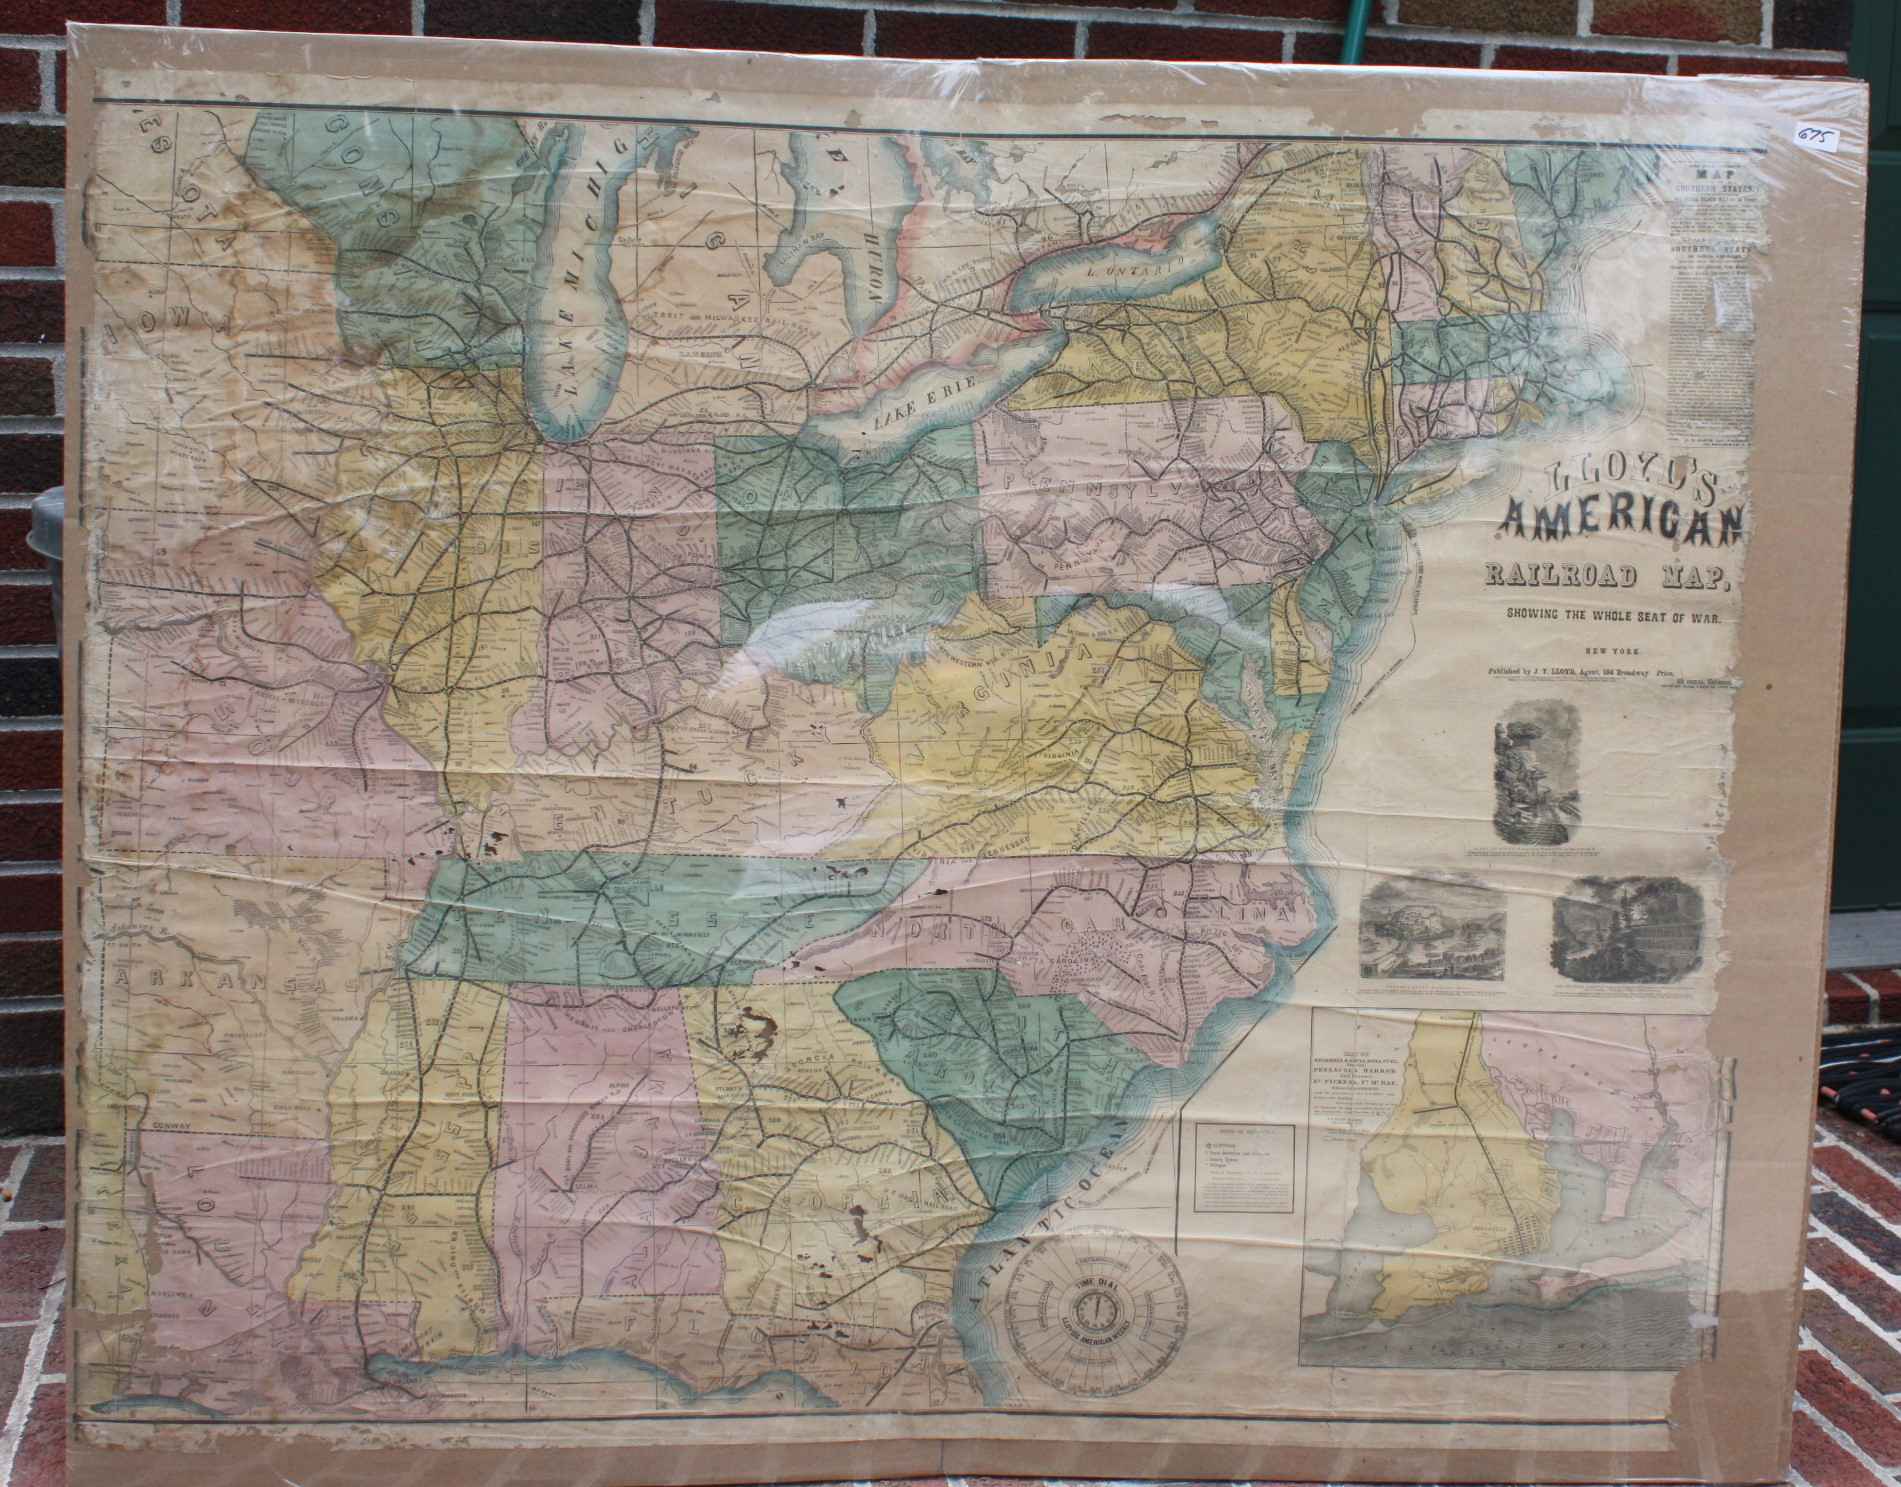 Image for Large 1861 Civil War Railroad Map Of The Seat Of War; Lloyd's American Railroad Map Showing The Whole Seat Of War, [LBC]